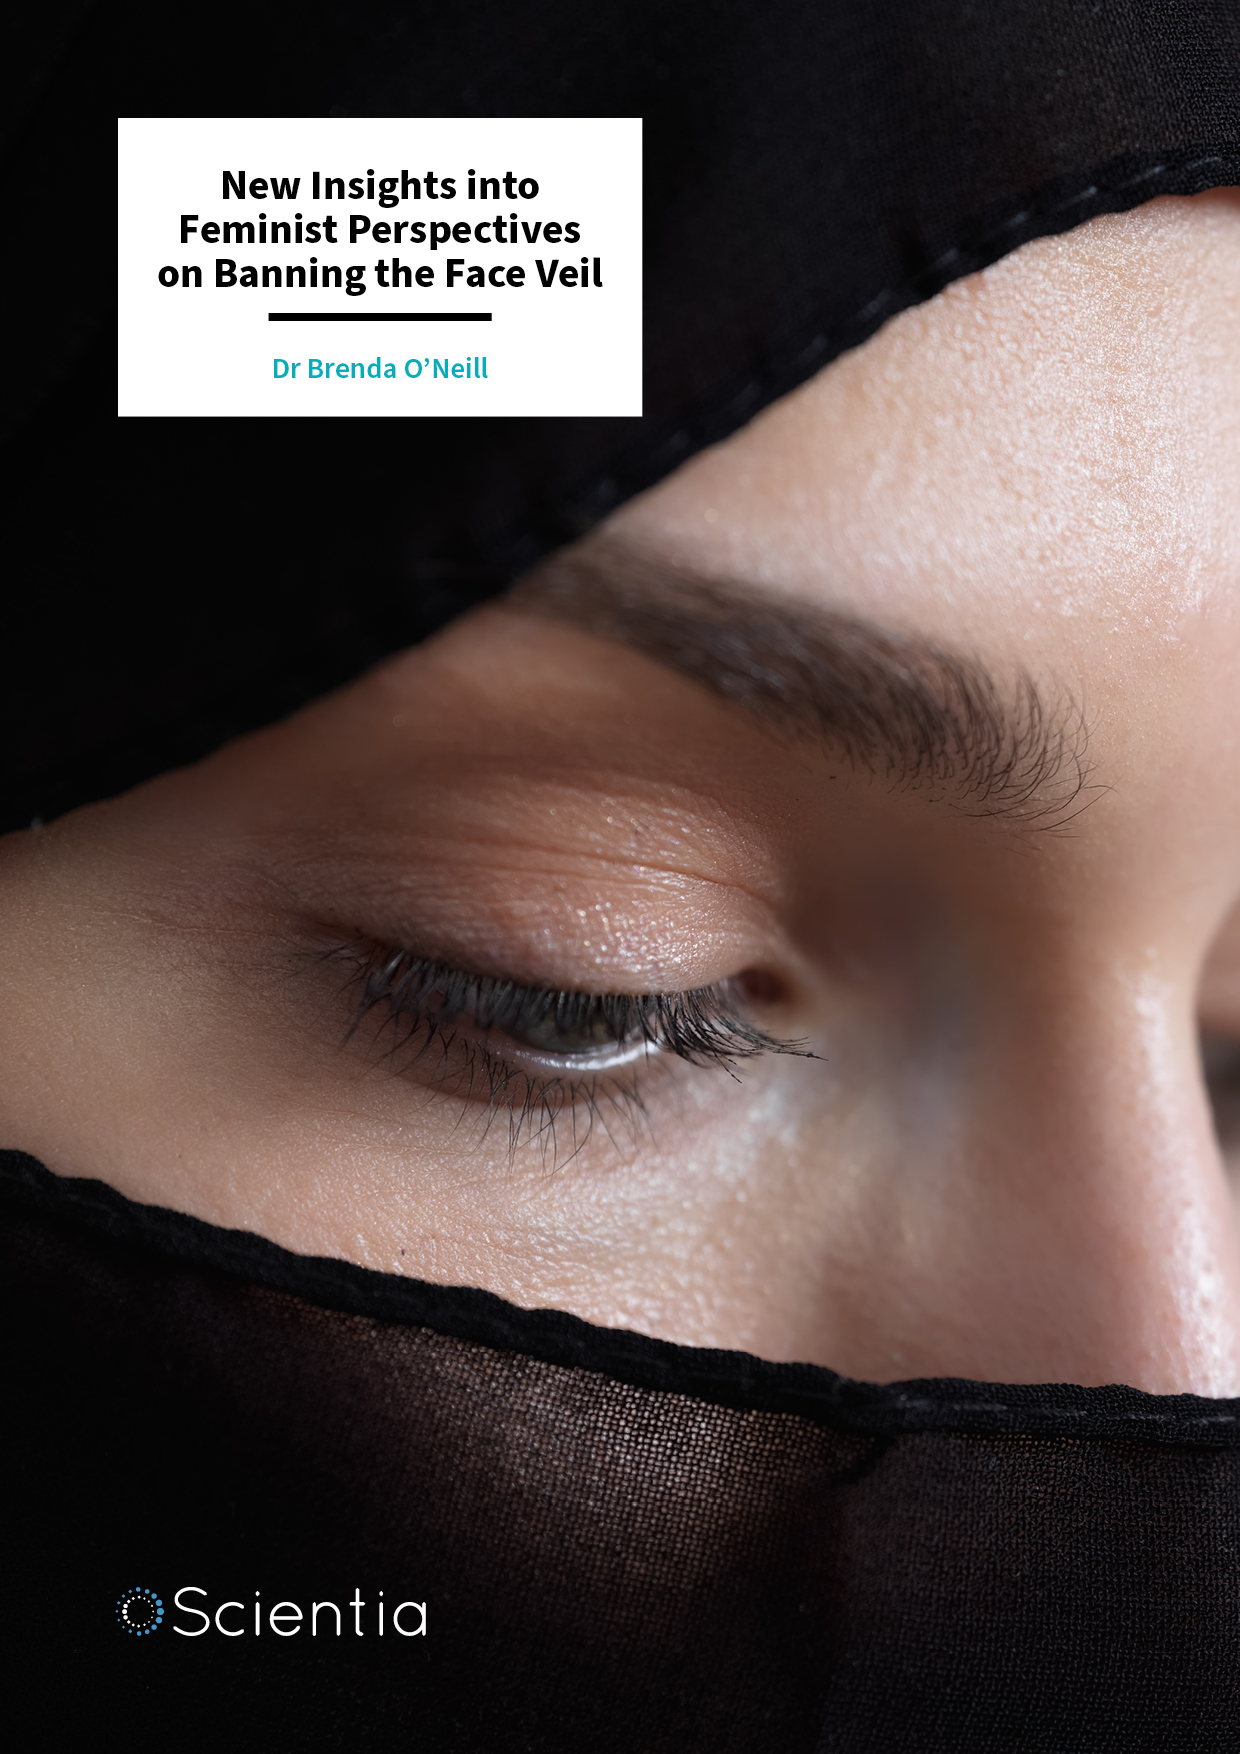 Dr Brenda O’Neill | New Insights into Feminist Perspectives on Banning the Face Veil